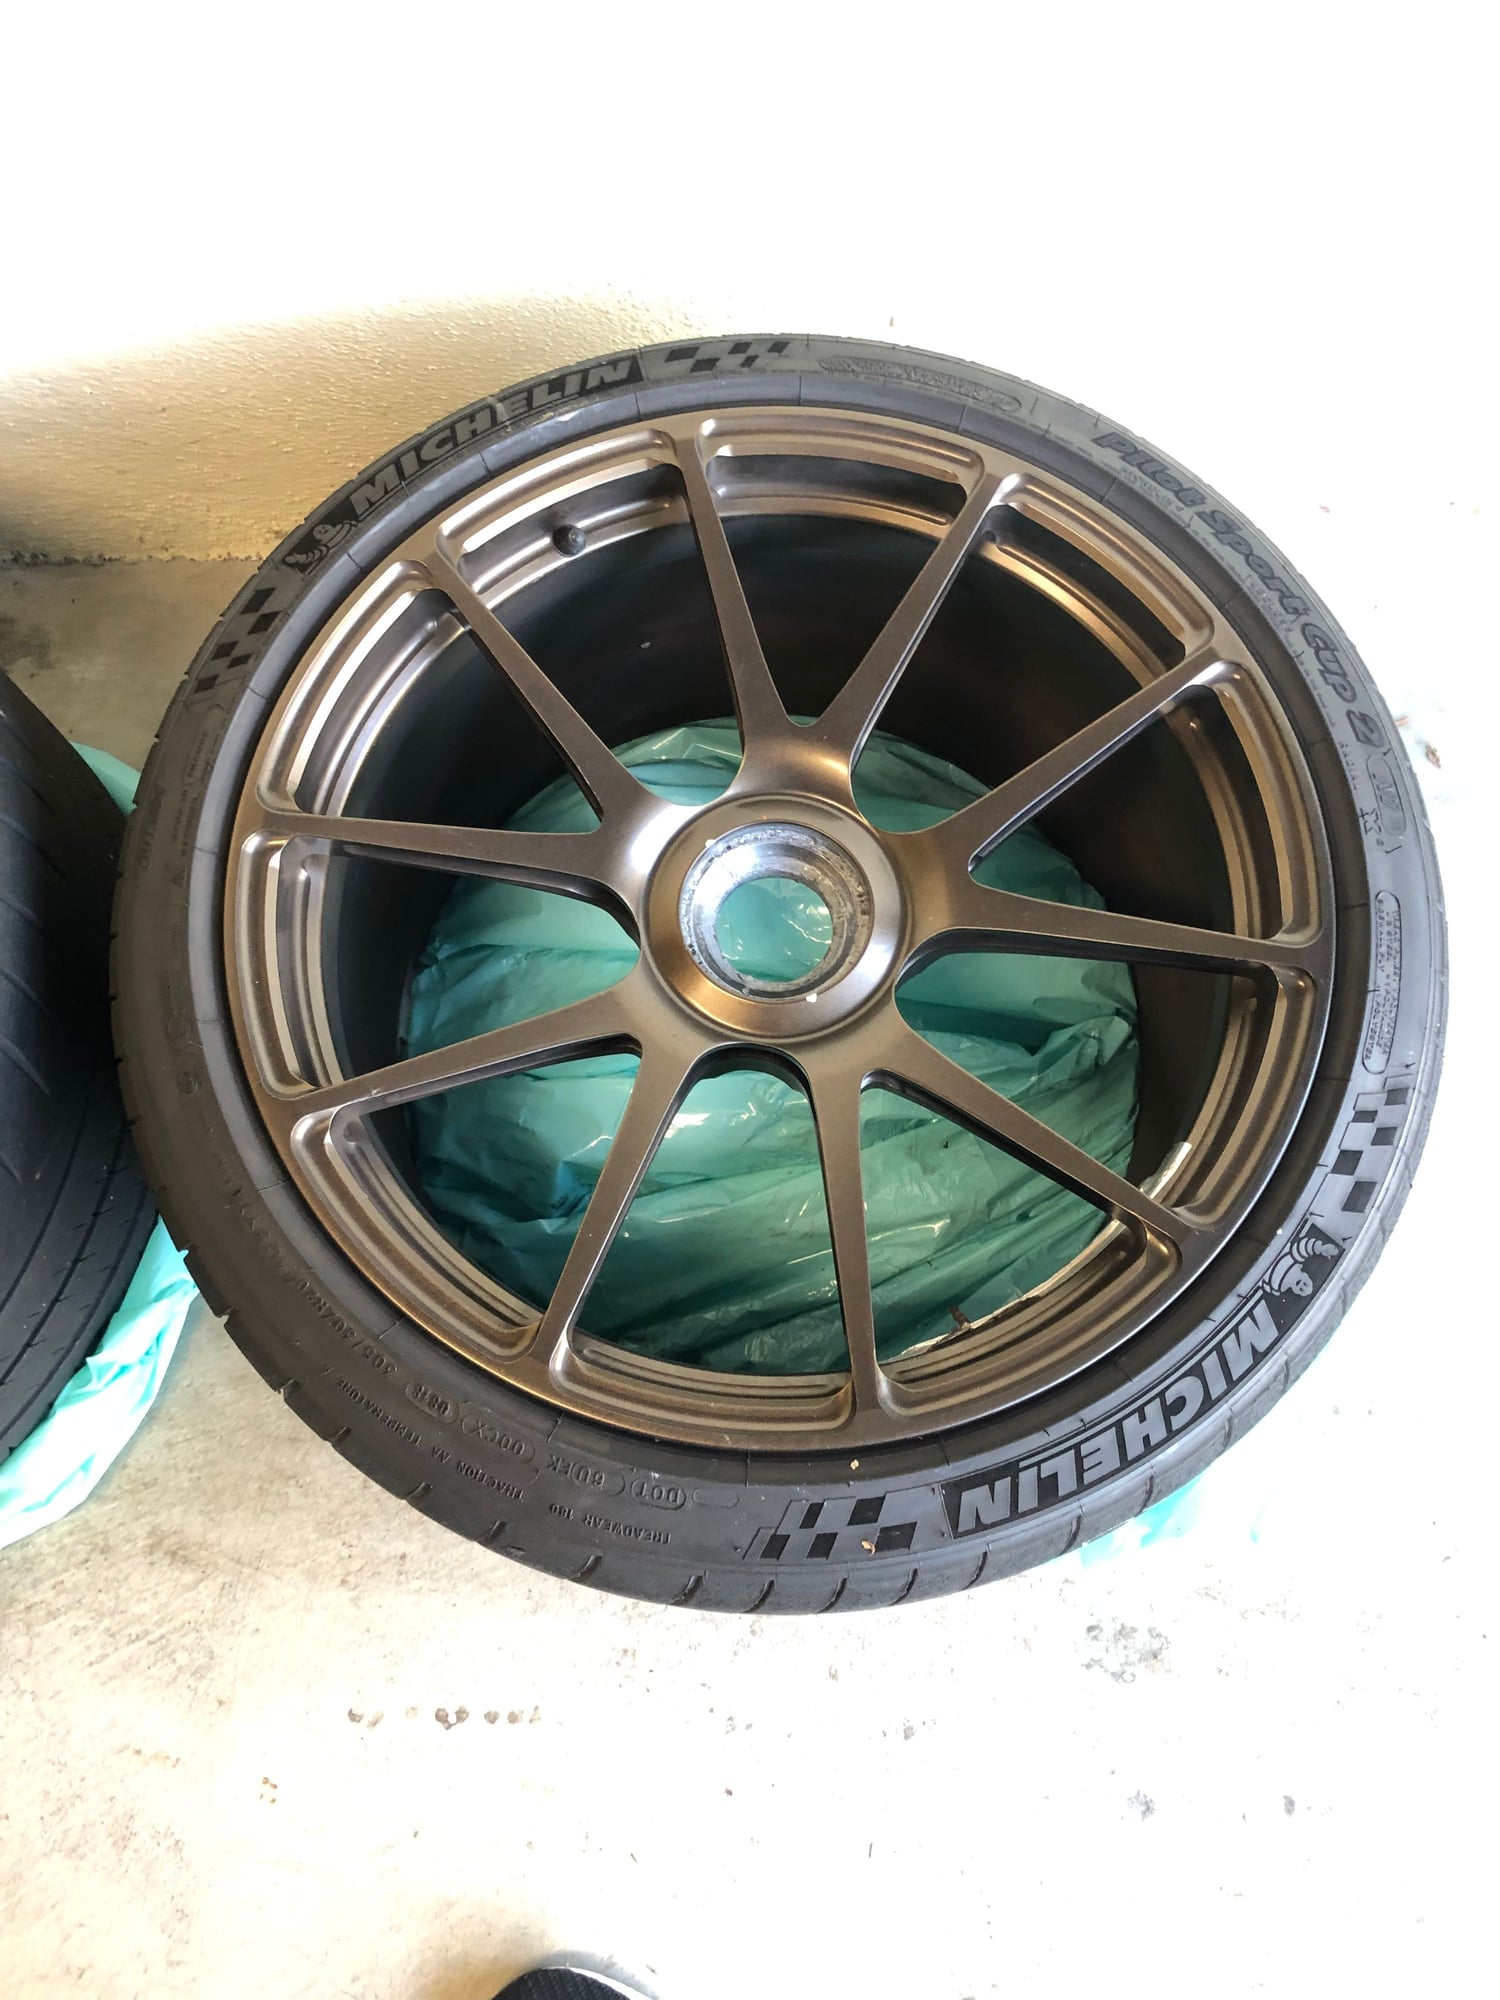 Wheels and Tires/Axles - FORGELINE GA1R-CL SATIN BRONZE (STOCK 2018 GTS OFFSETS) - Used - 2017 to 2019 Porsche 911 - Los Angeles, CA 90064, United States